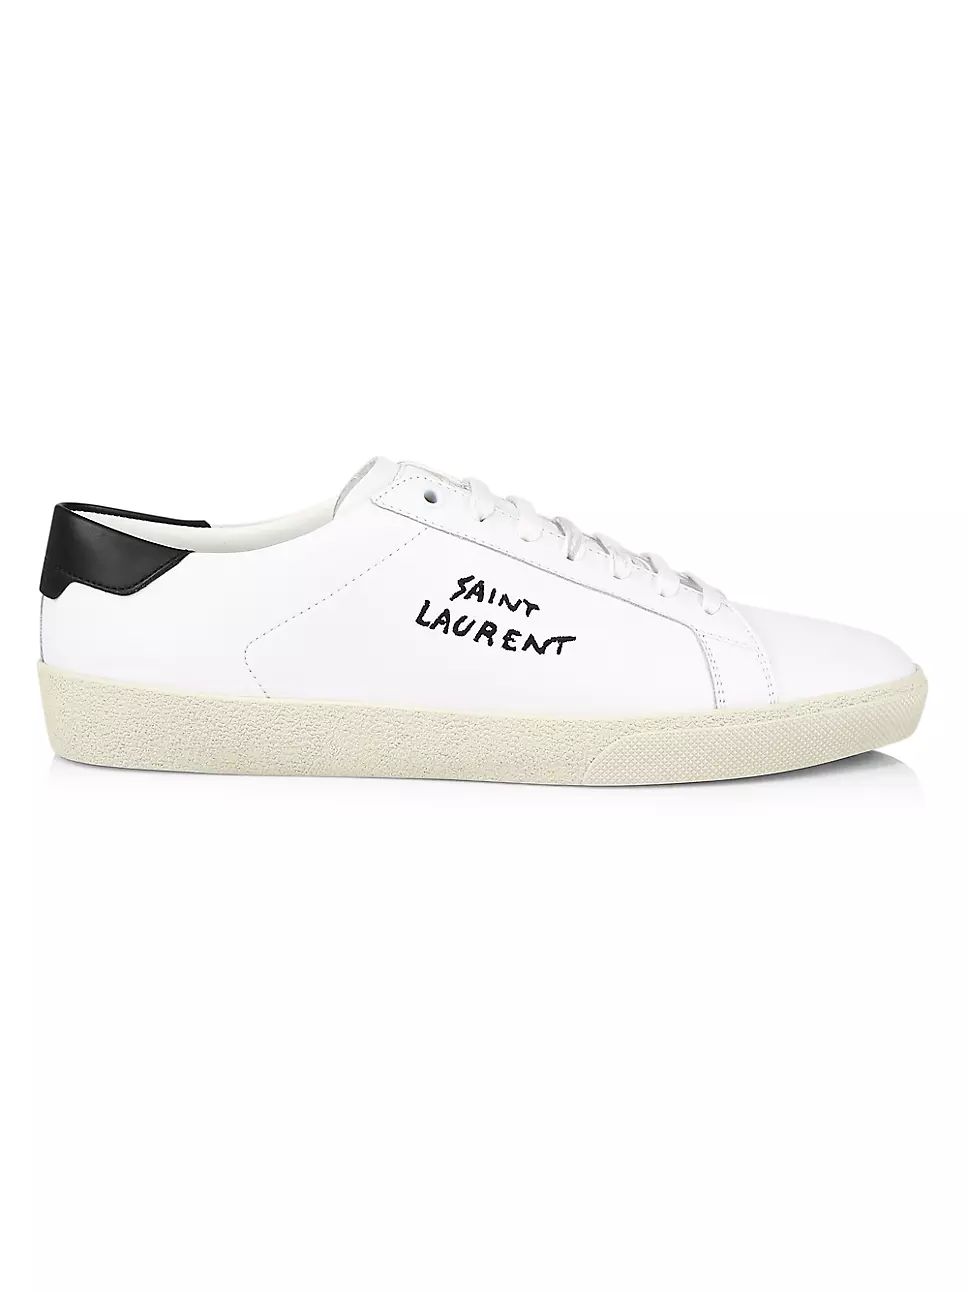 Signa Low-Top Leather Sneakers | Saks Fifth Avenue